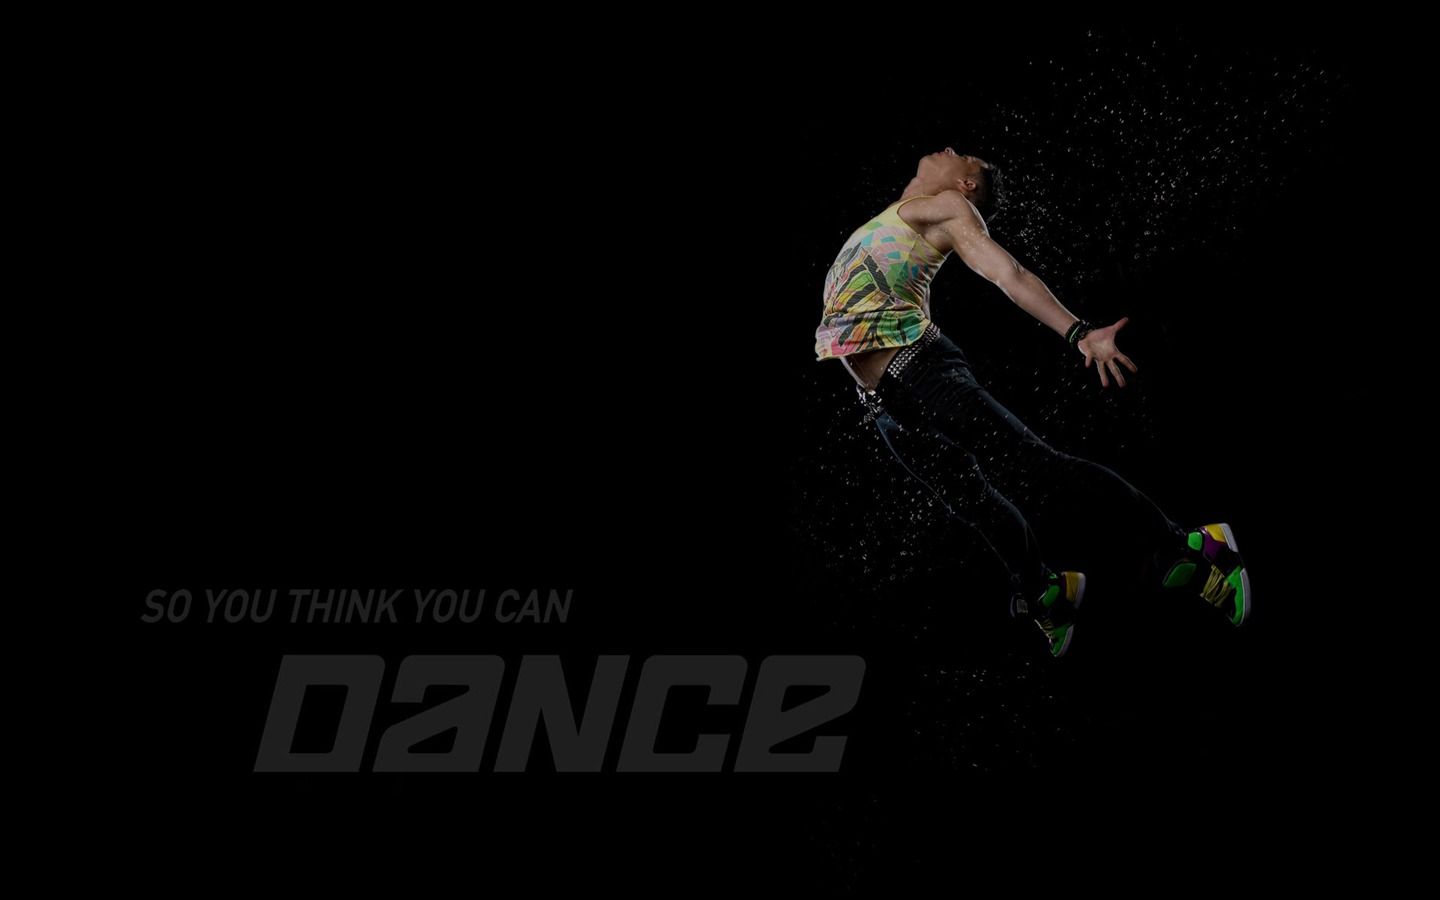 So You Think You Can Dance 舞林爭霸壁紙(二) #6 - 1440x900